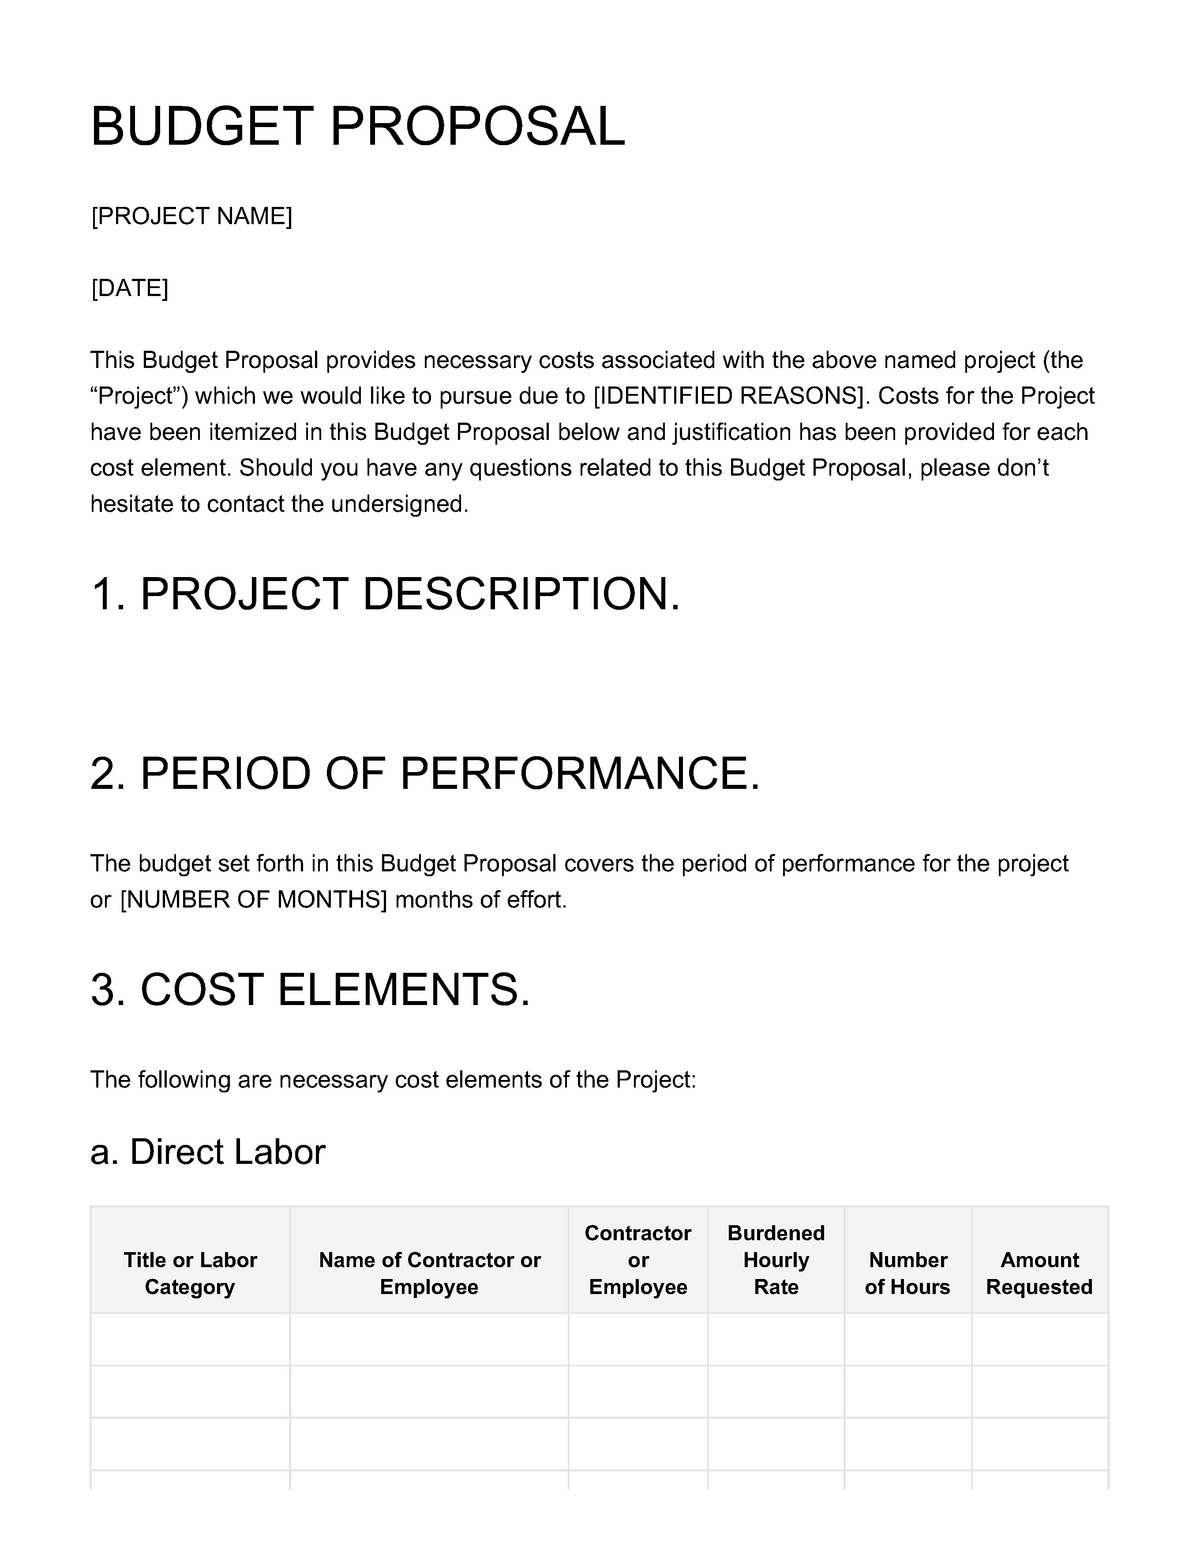 Template Sample Budget Proposal BUDGET PROPOSAL PROJECT NAME DATE 